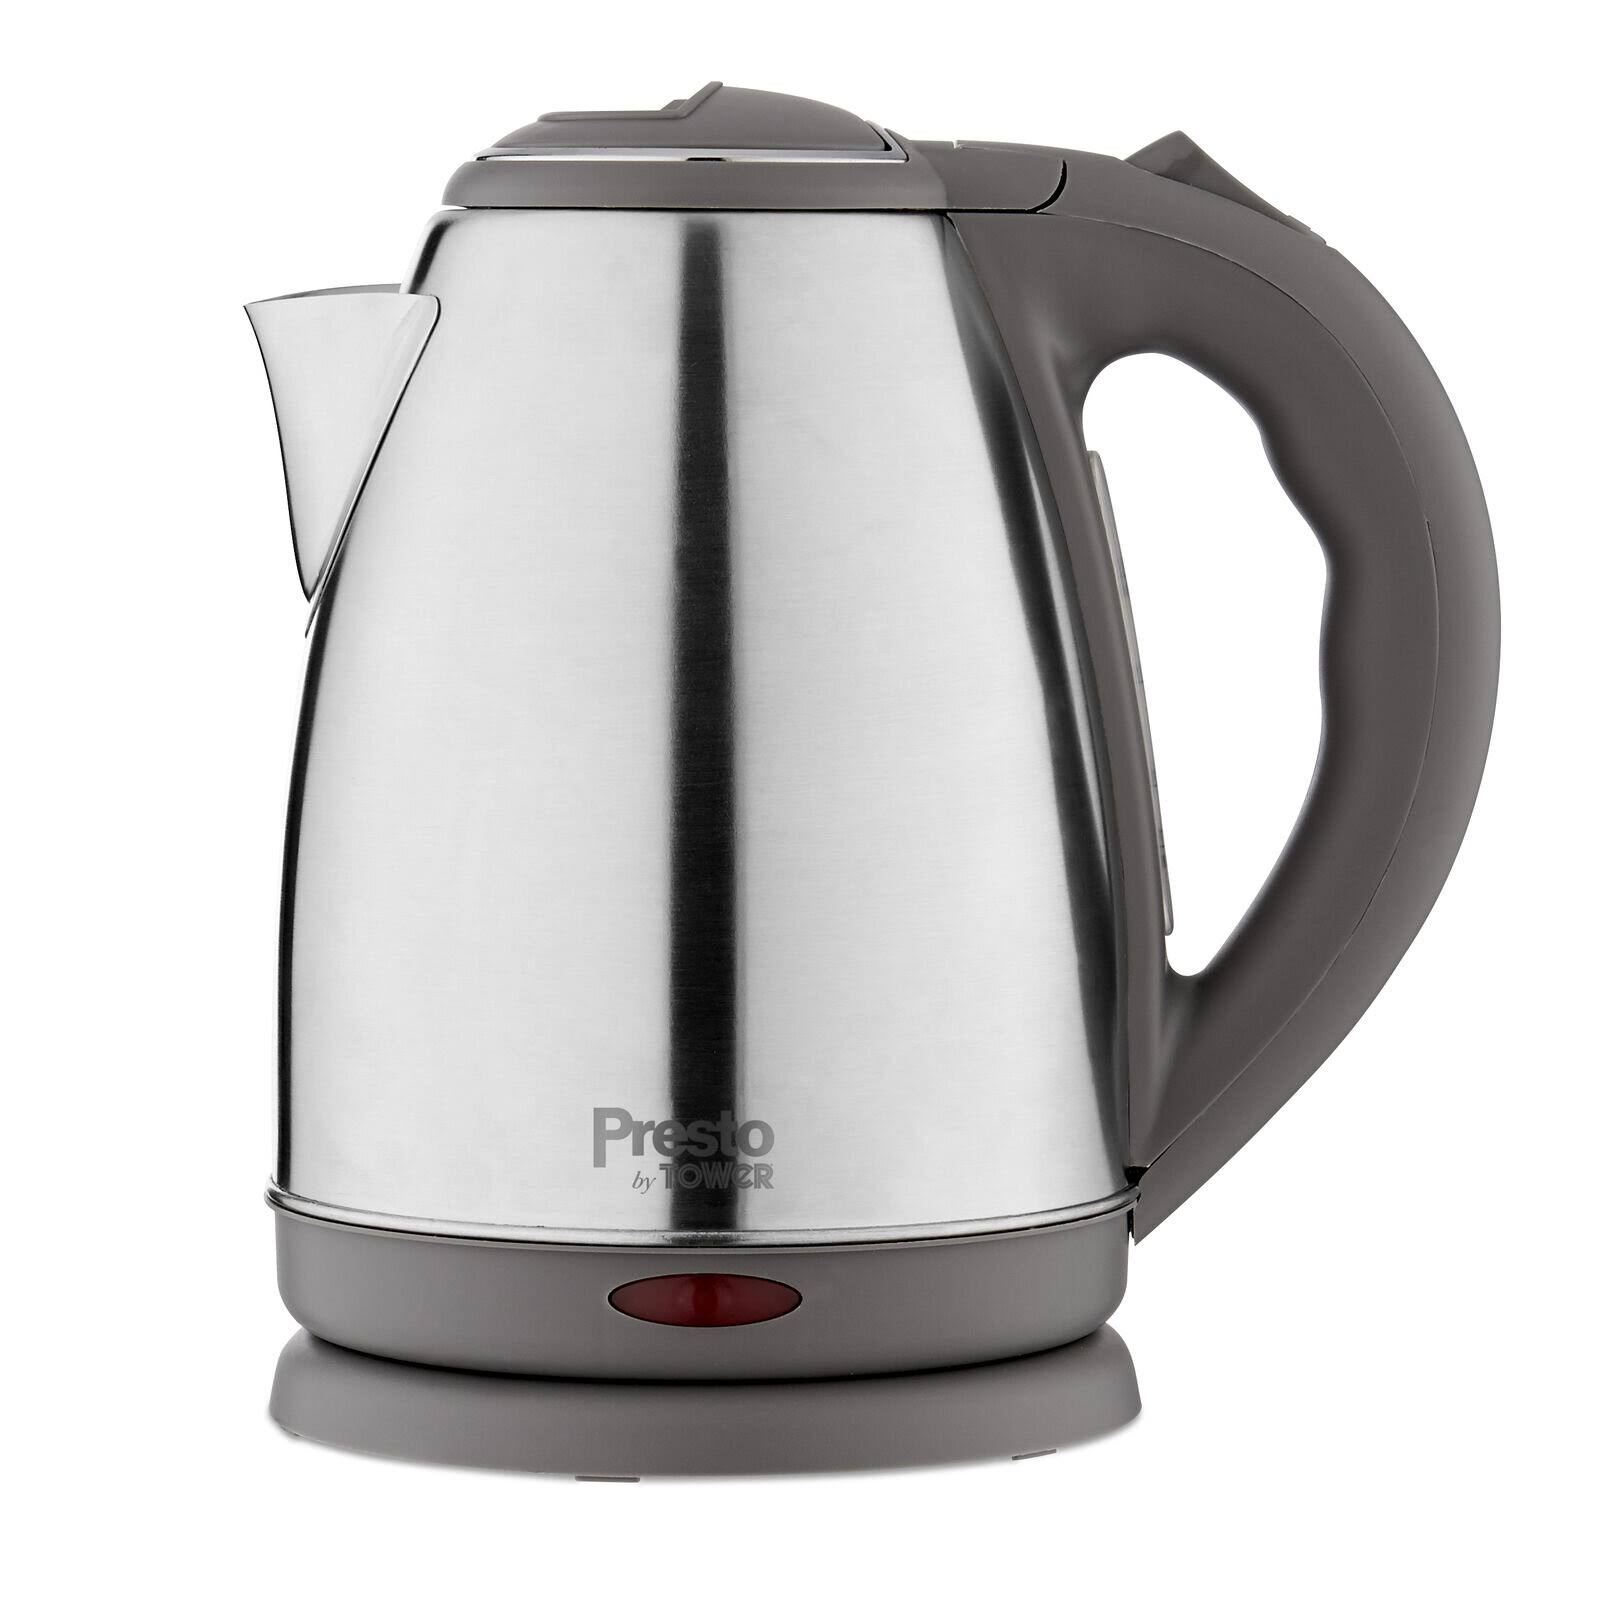 Tower - Presto Kettle 1.8L, Brushed Stainless Steel